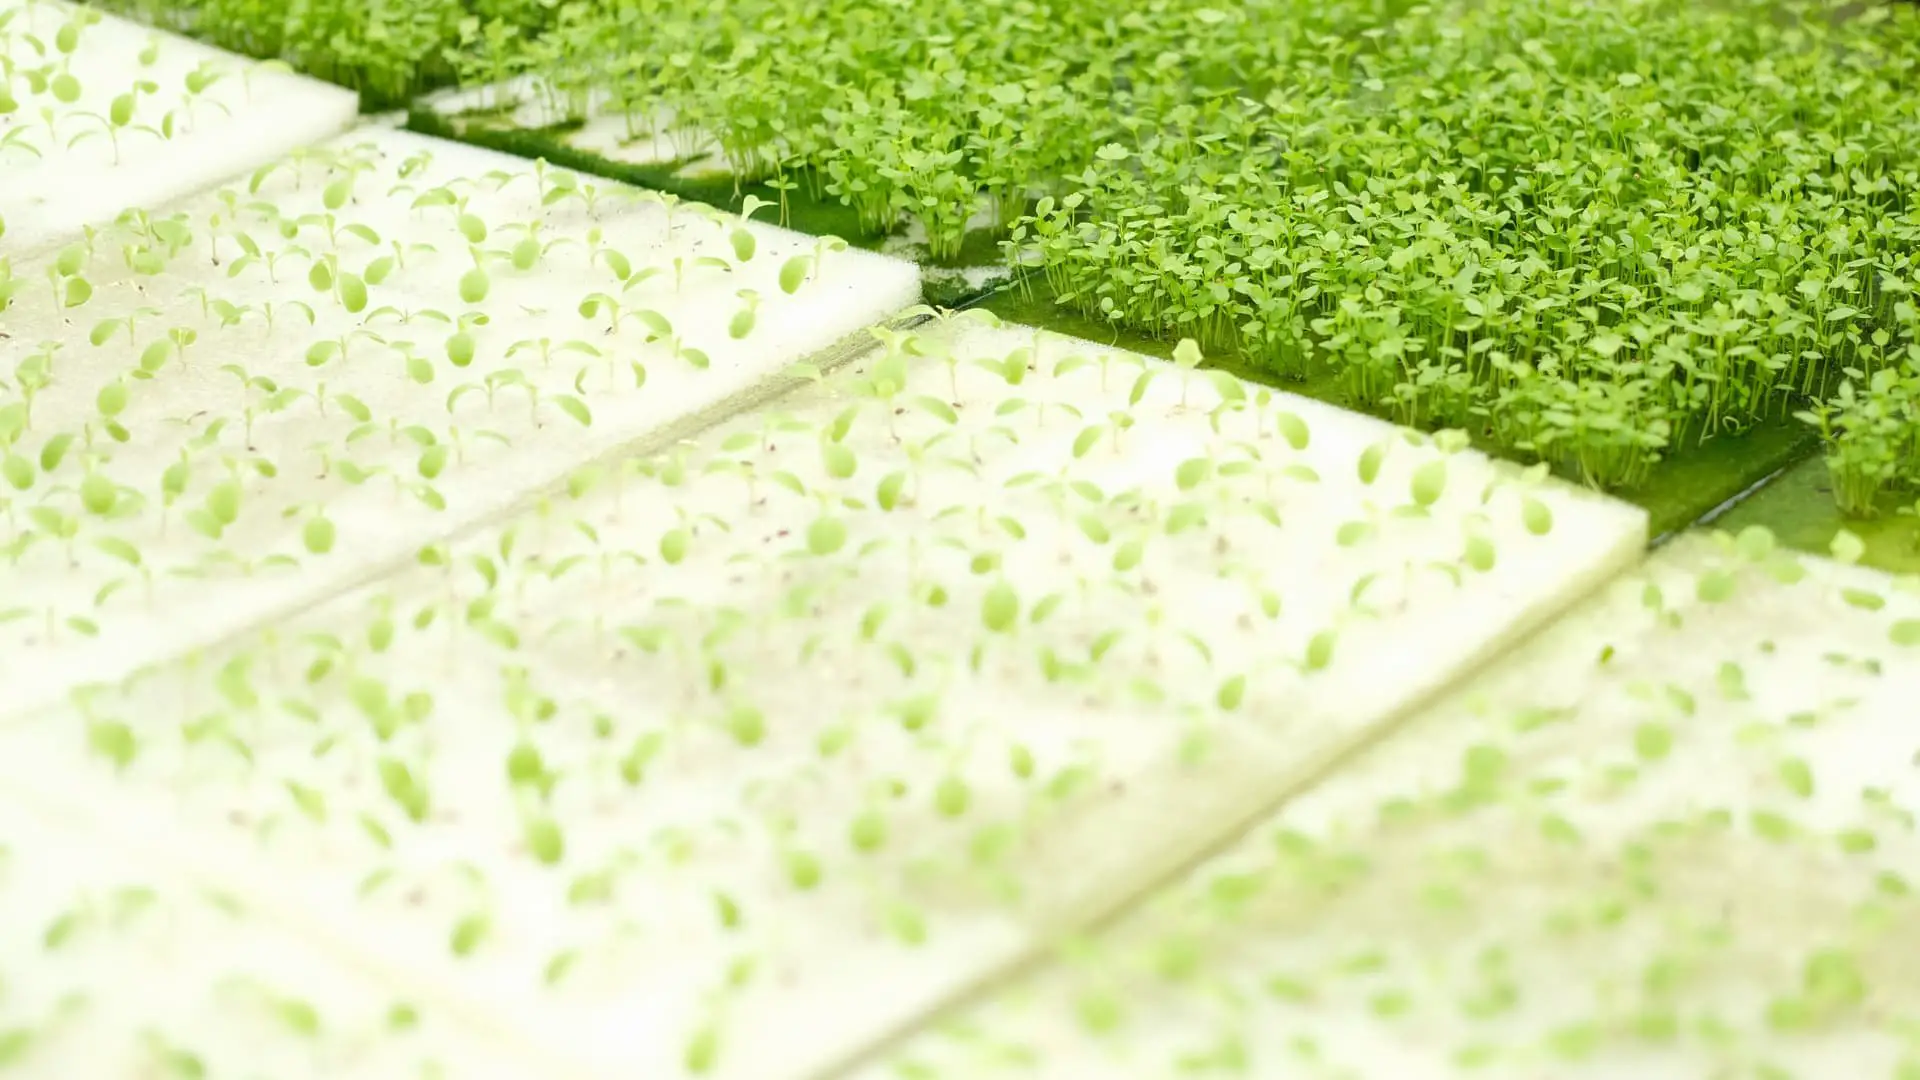 % Discover how to use sponges to grow plants hydroponically from seedling to germination in the home, types, benefits, drawbacks, affecting factors and how to clean the sponge.